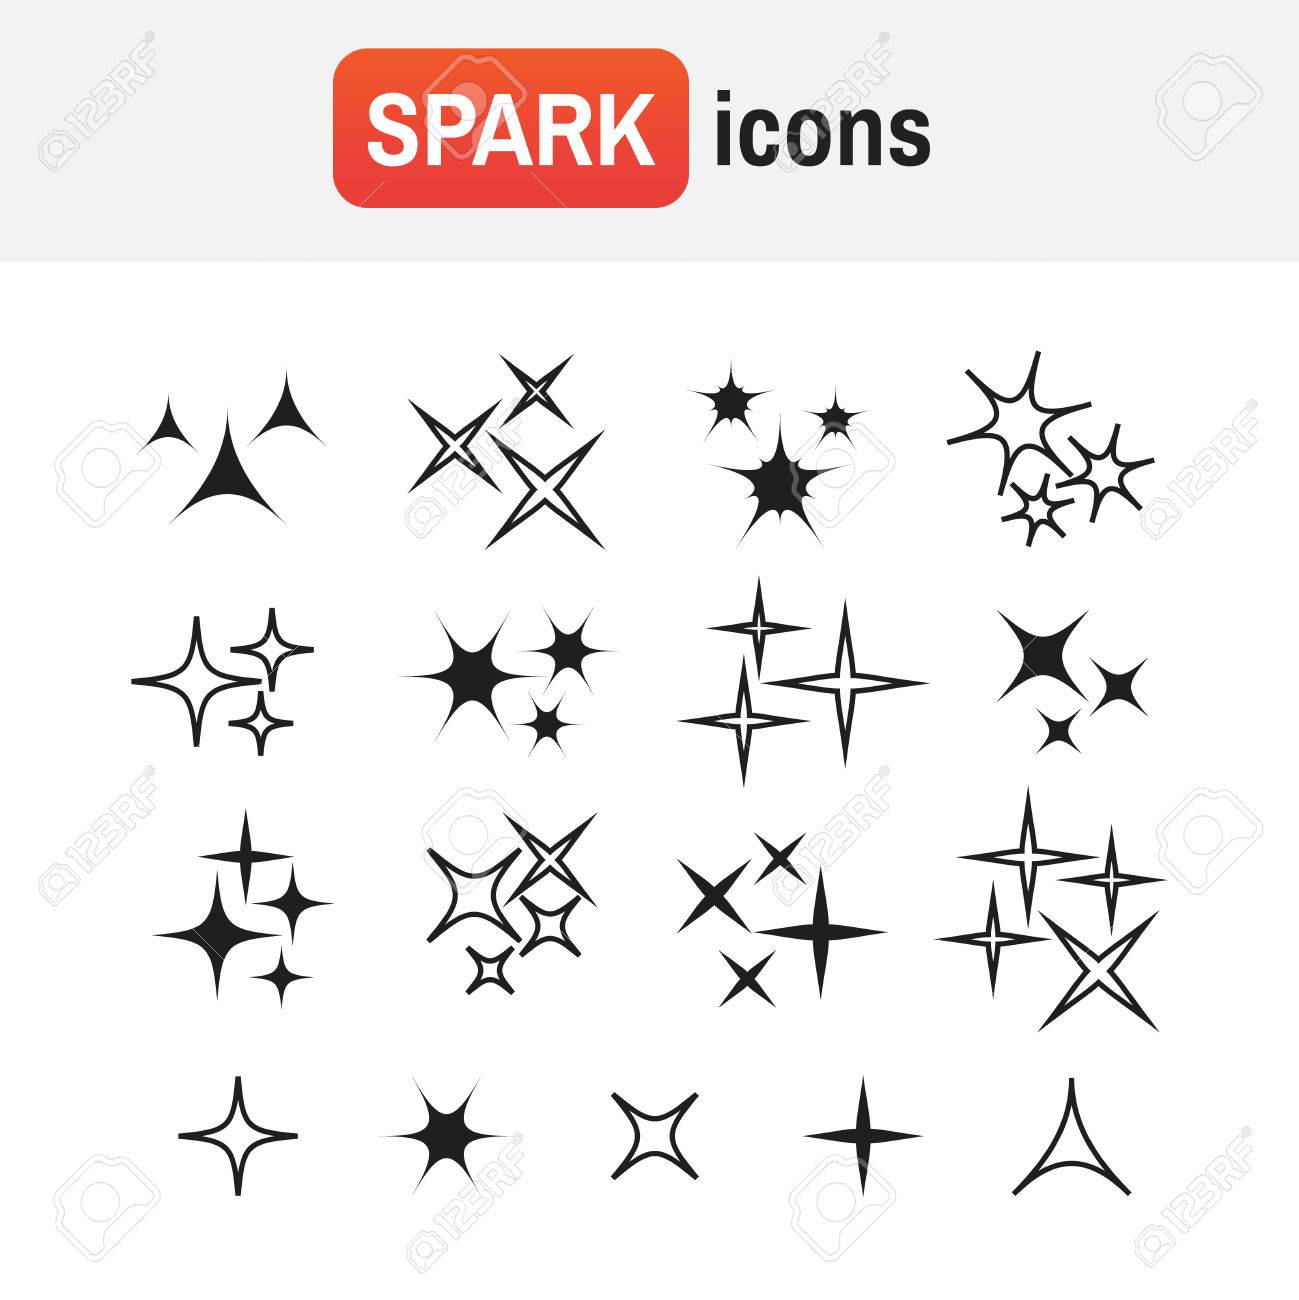 outline of leaf with sparkles icon, leaf icon, isolated on white 